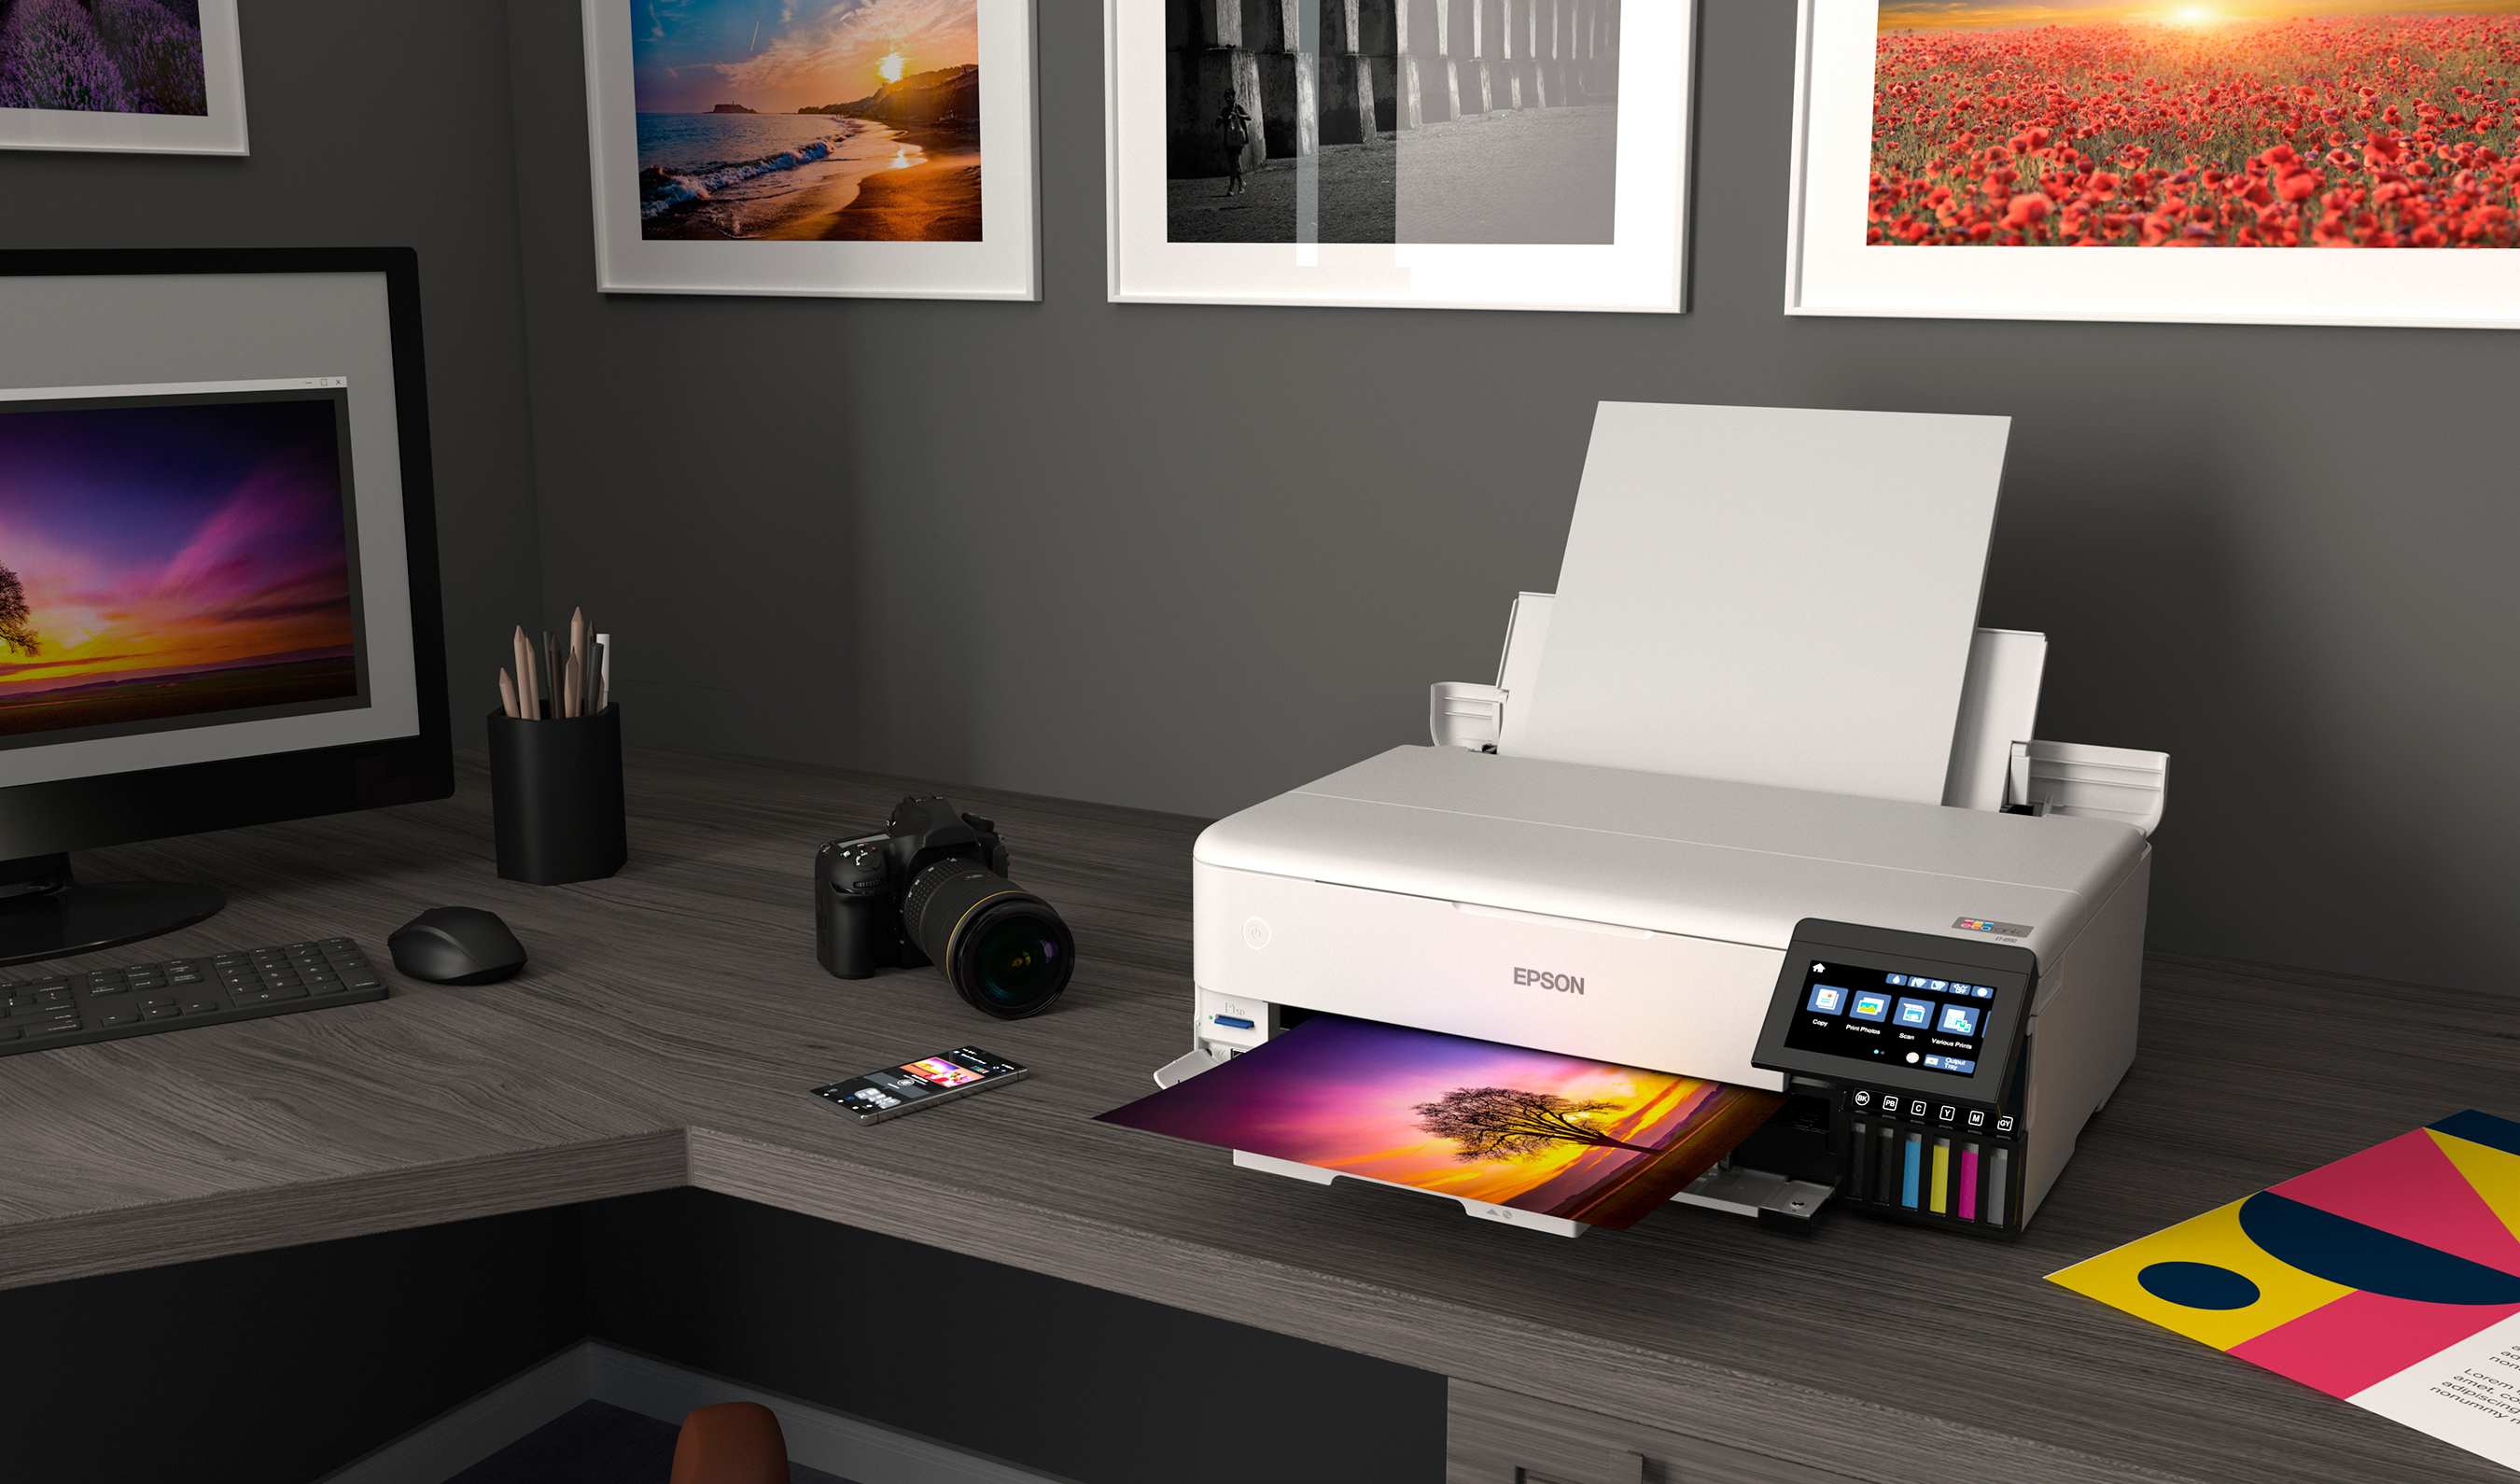 Epson EcoTank Photo printers can print 4" x 6" photos for about 4 cents each, compared to 40 cents with cartridges,4 and as an added convenience each set of bottles provides up to two years of ink.